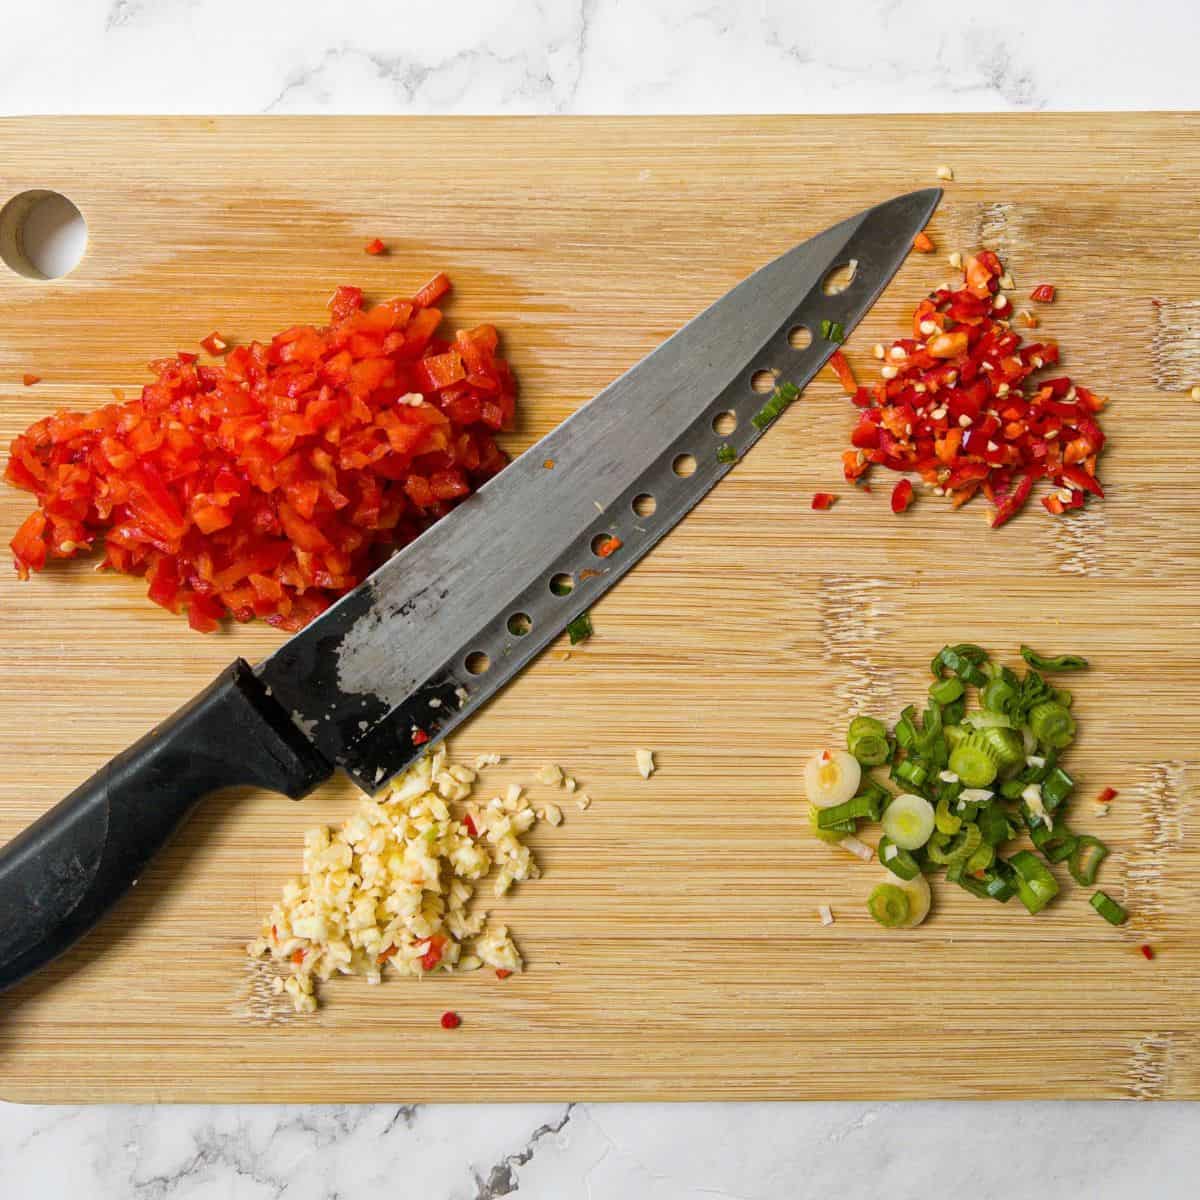 Red pepper, chilli, garlic & spring onion on chopping board with a knife.